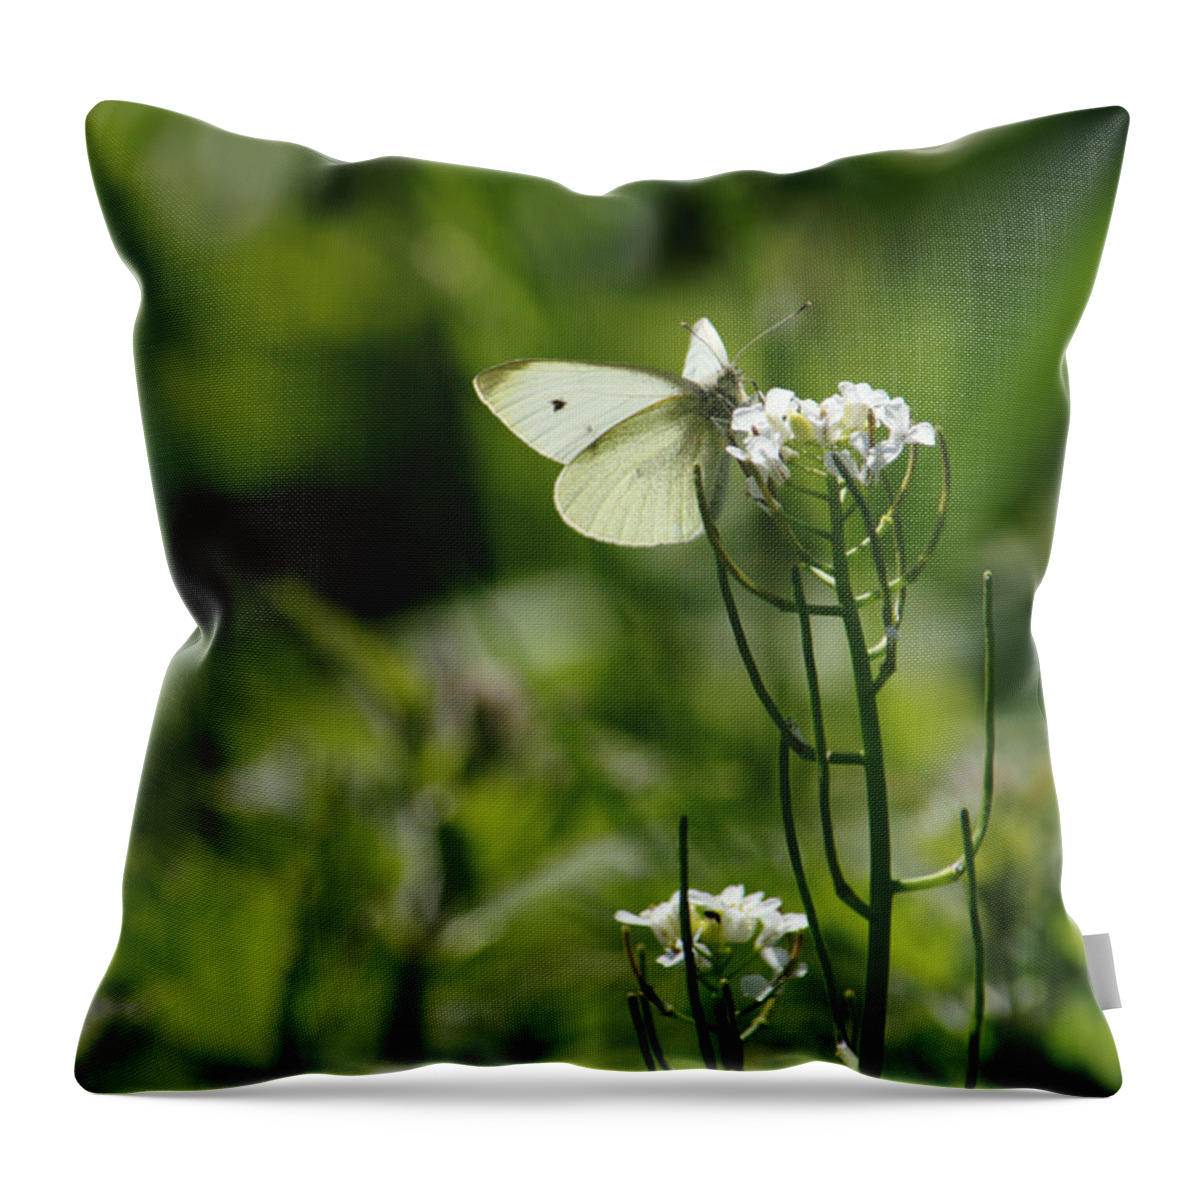 Butterfly Throw Pillow featuring the photograph Small White In Scottish Meadow by Adrian Wale